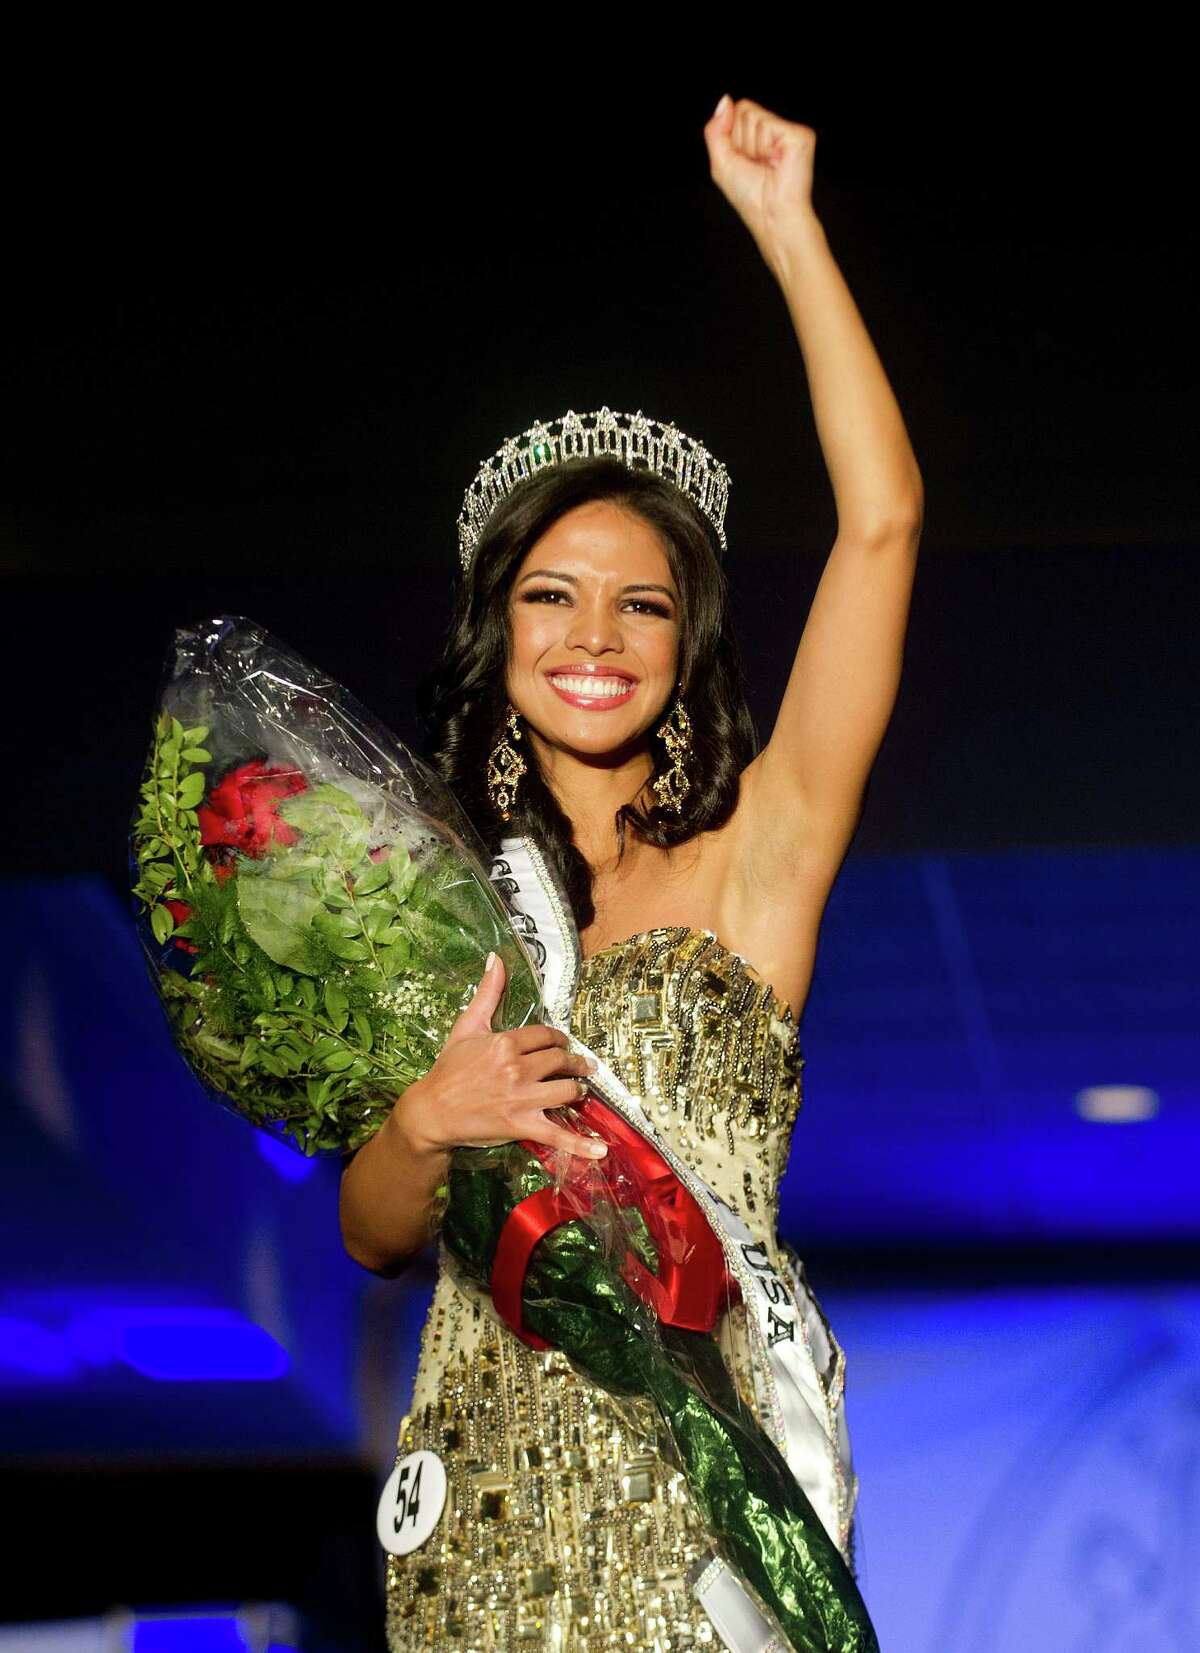 Desirée Pérez of Greenwich is crowned Miss Connecticut USA at the Stamford Marriott in Stamford, Conn., on Sunday, November 17, 2013.